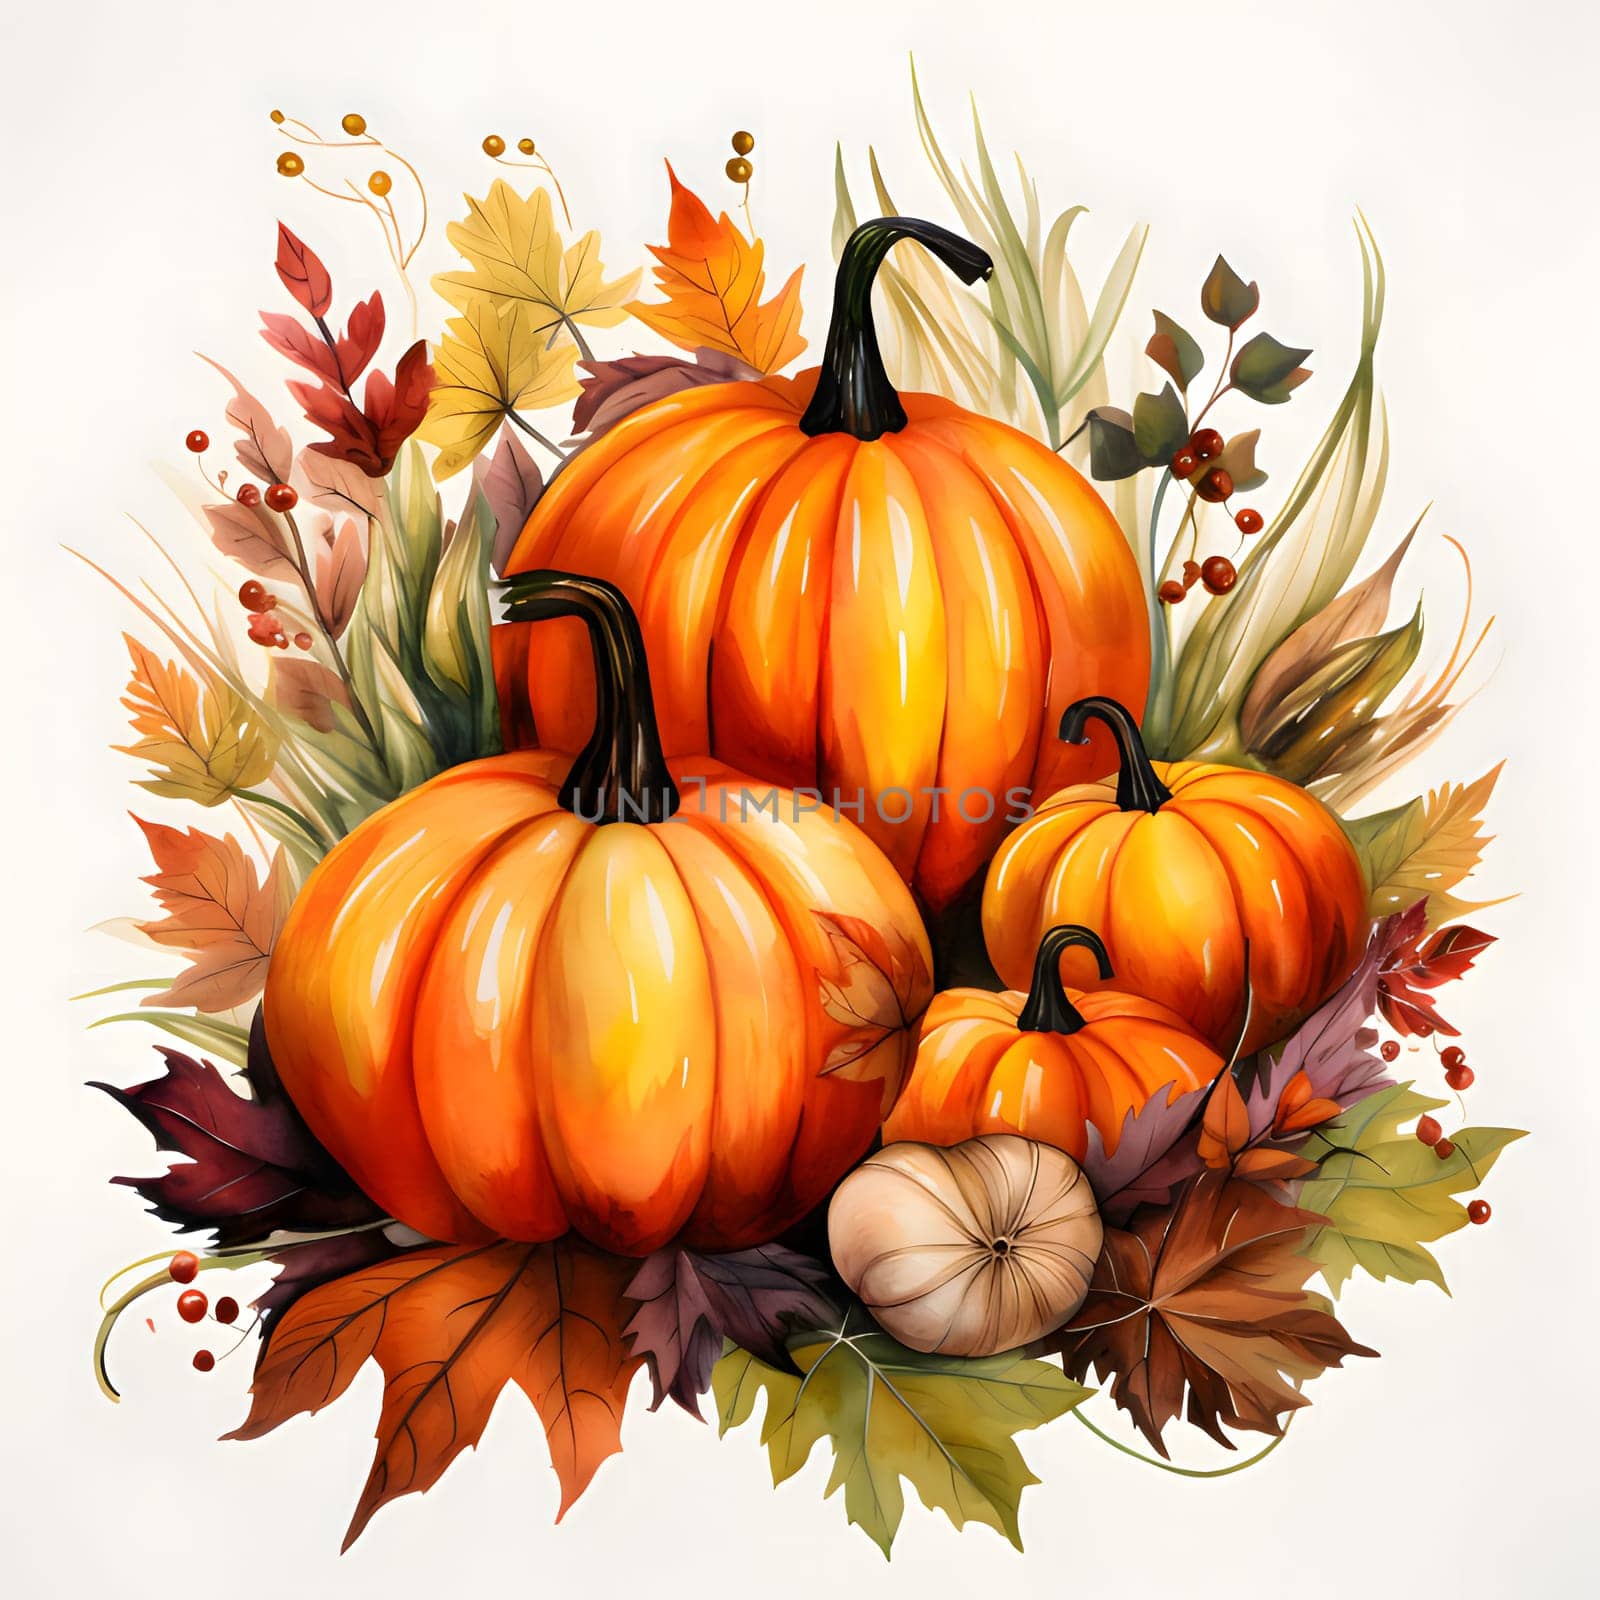 Illustration of pumpkins around autumn leaves. Pumpkin as a dish of thanksgiving for the harvest, picture on a white isolated background. An atmosphere of joy and celebration.